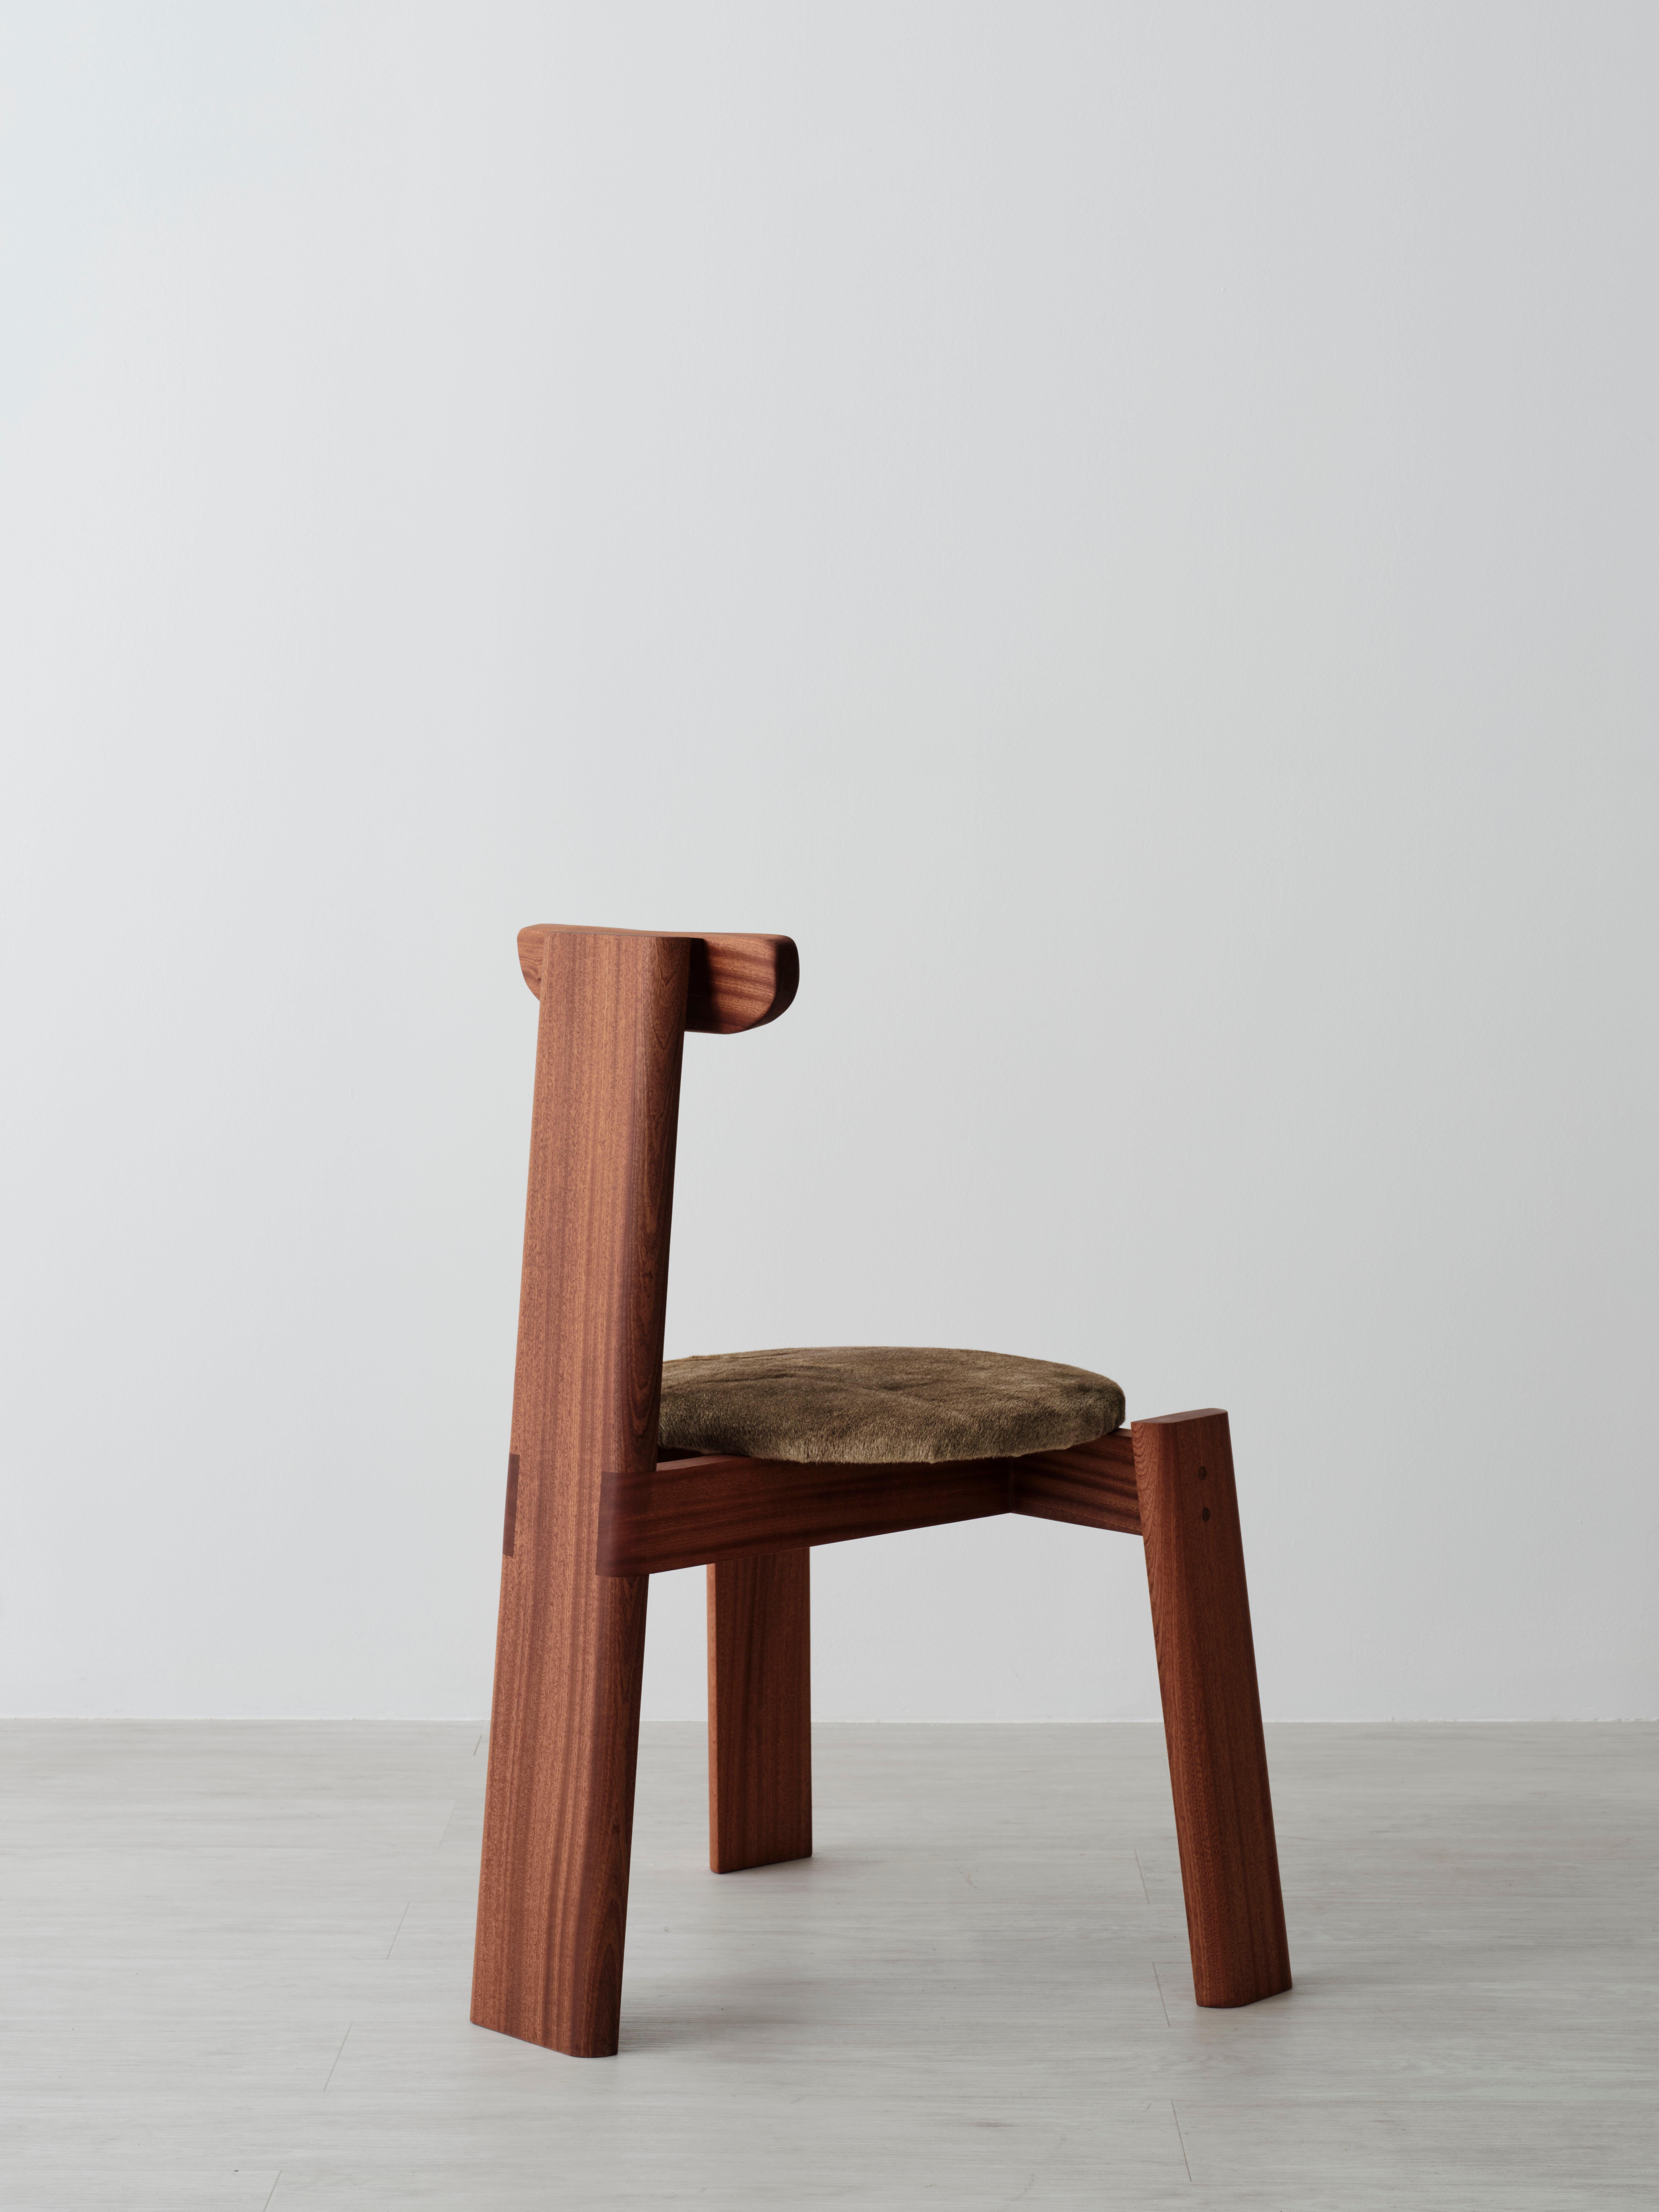 The Lucie is a solid wood chair designed to be used at a dining table or as a side chair in any room. The backrest will clear a 30